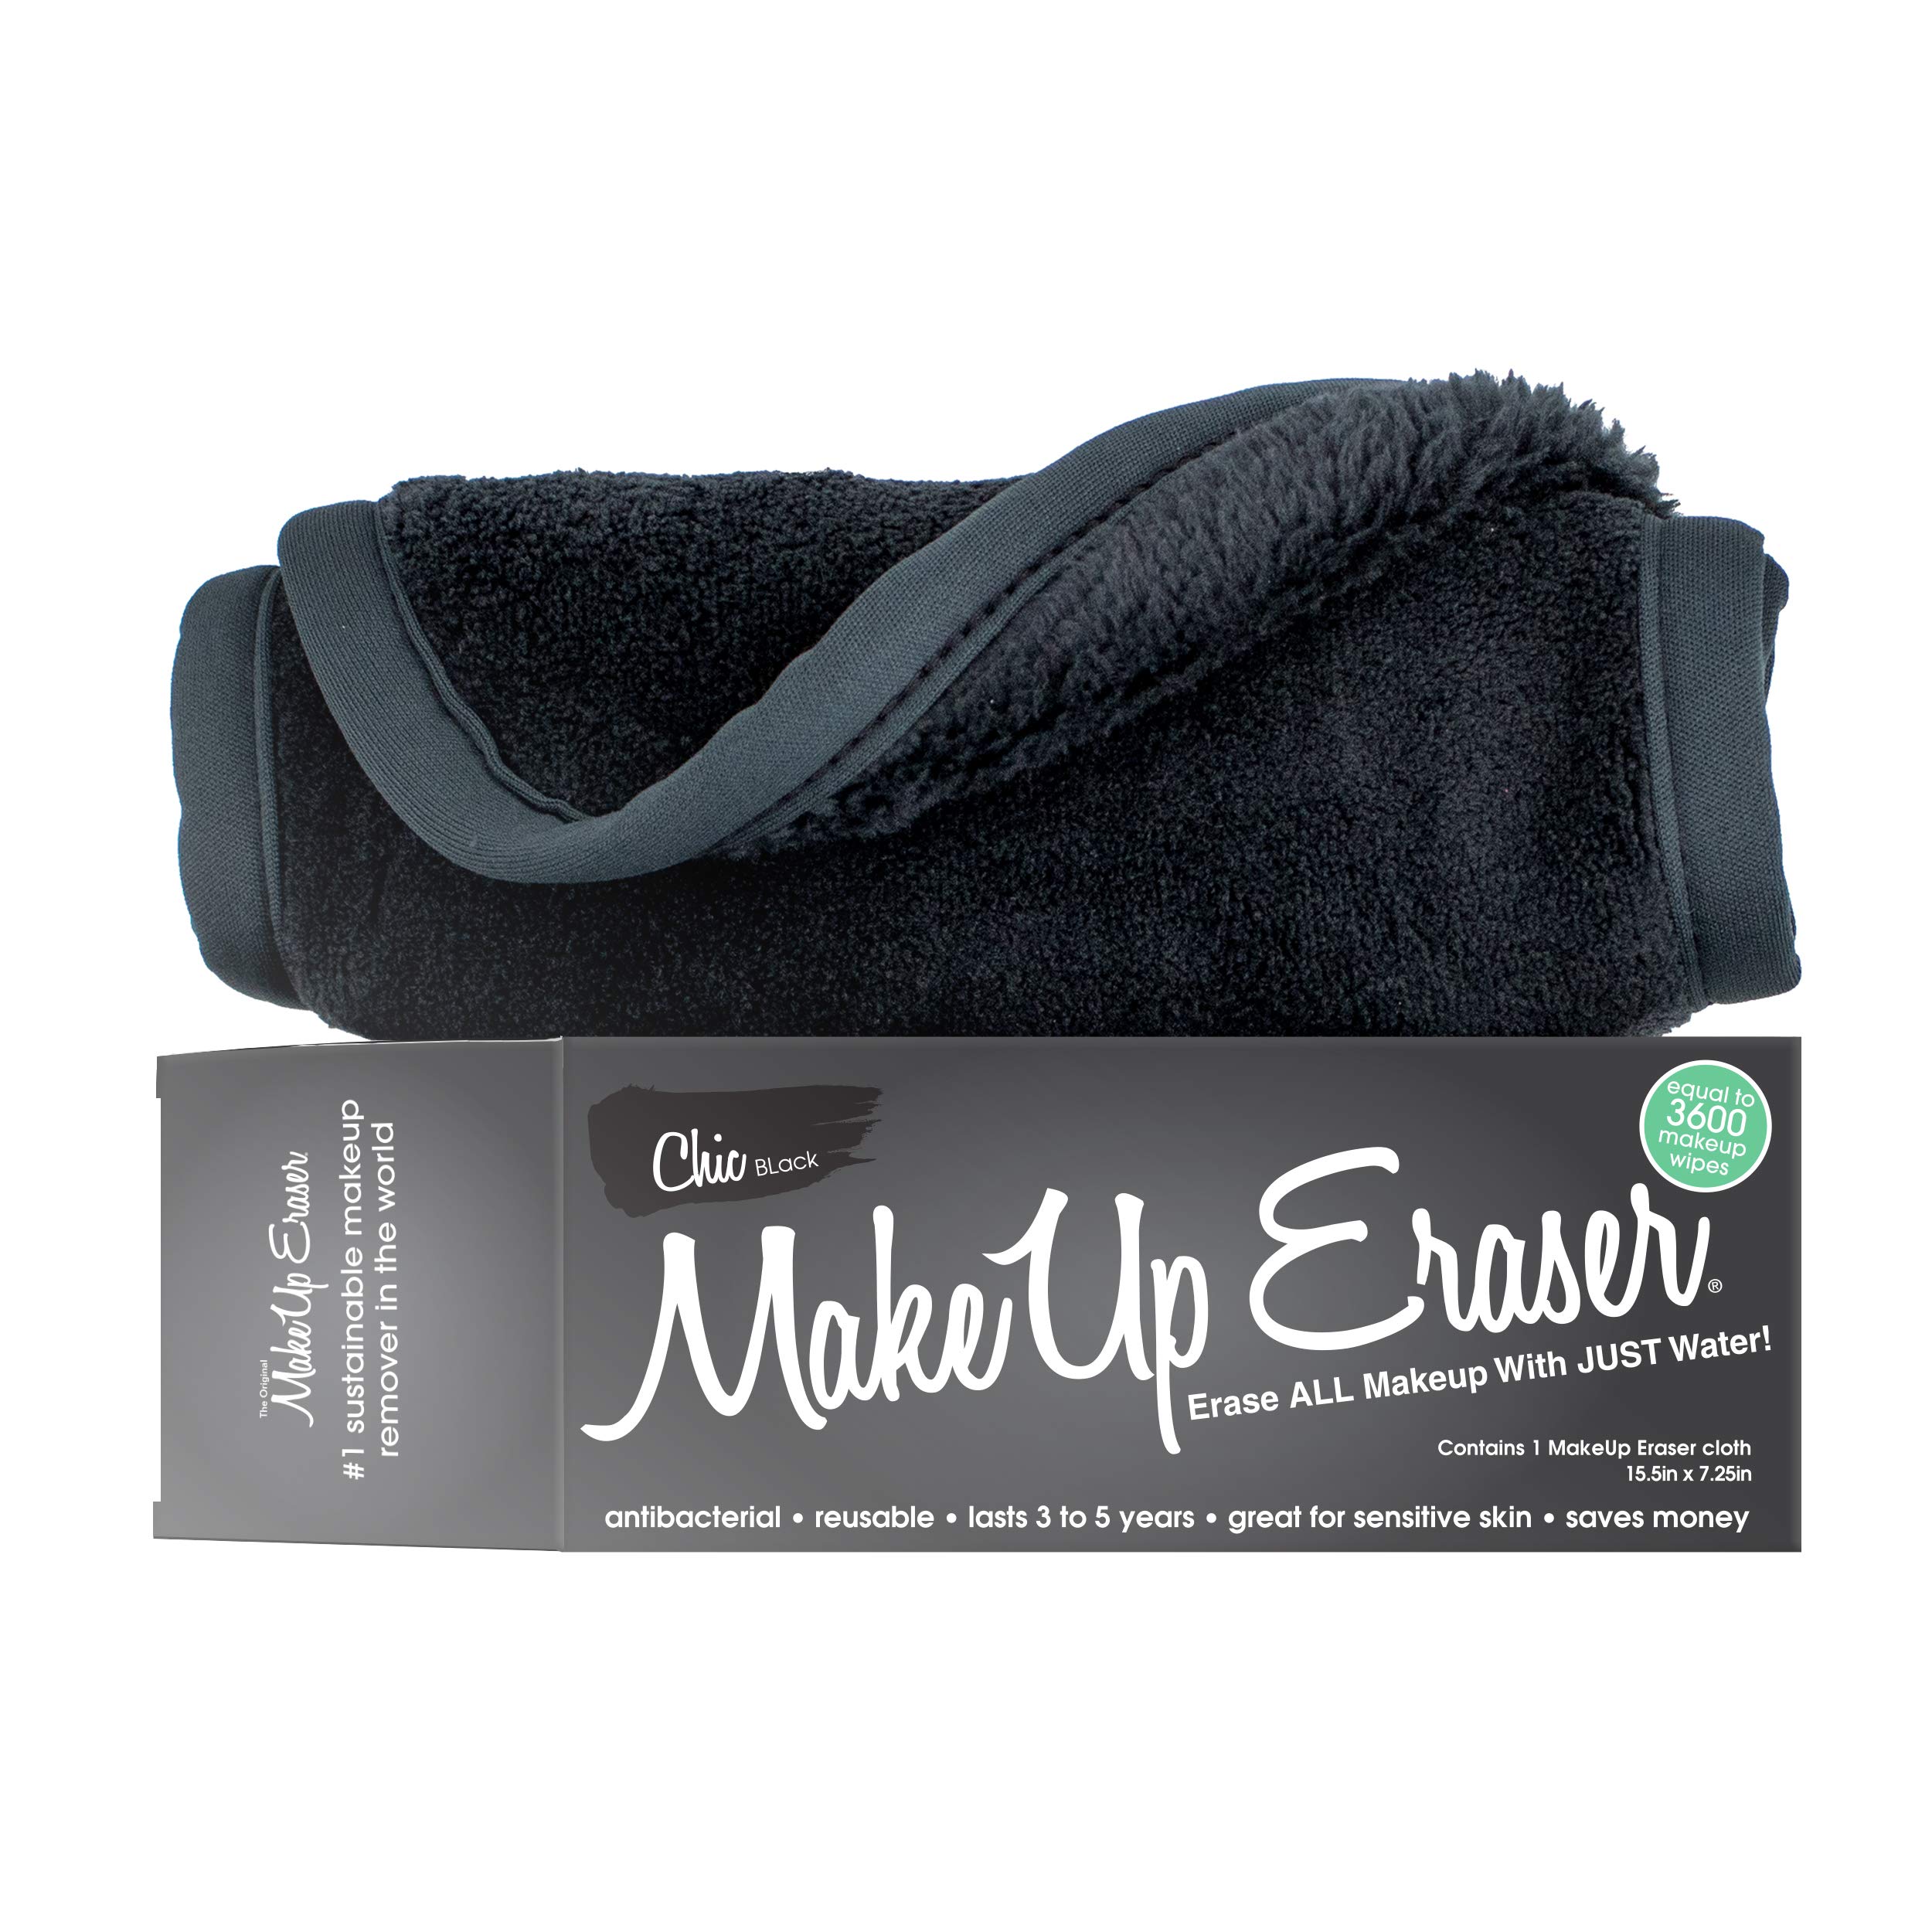 MakeUp Eraser/Exfoliator Cloth (Chic Black) $9.50 w/ Subscribe & Save +Free Shipping w/ Prime or on $35+